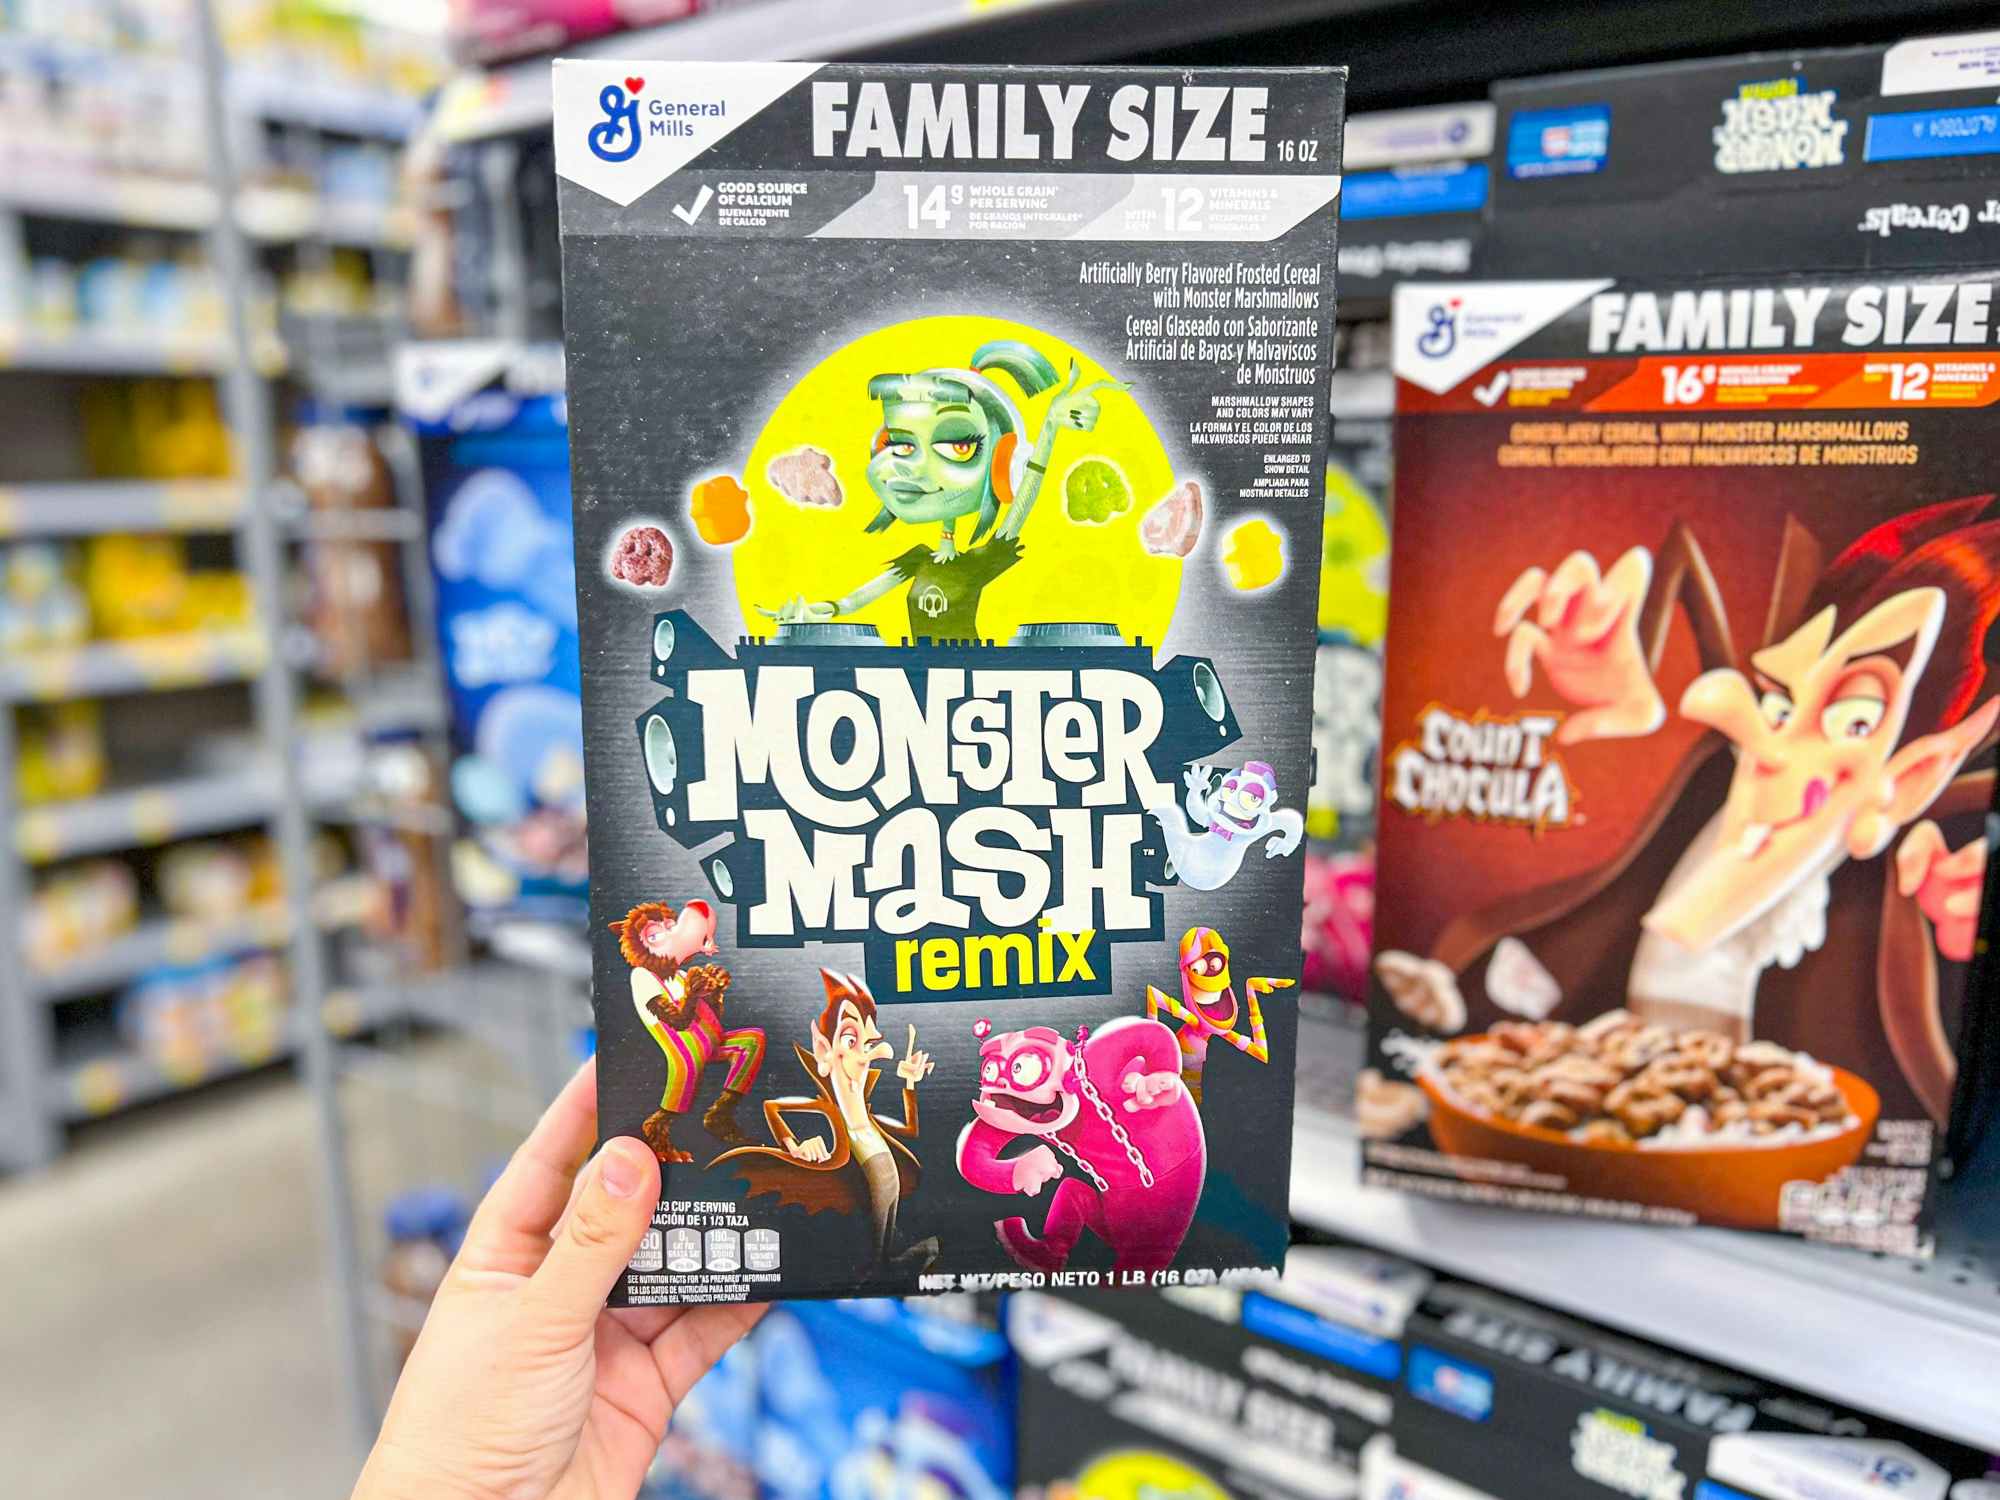 someone holding up a box ofMonster Mash Remix monster cereal at Walmart